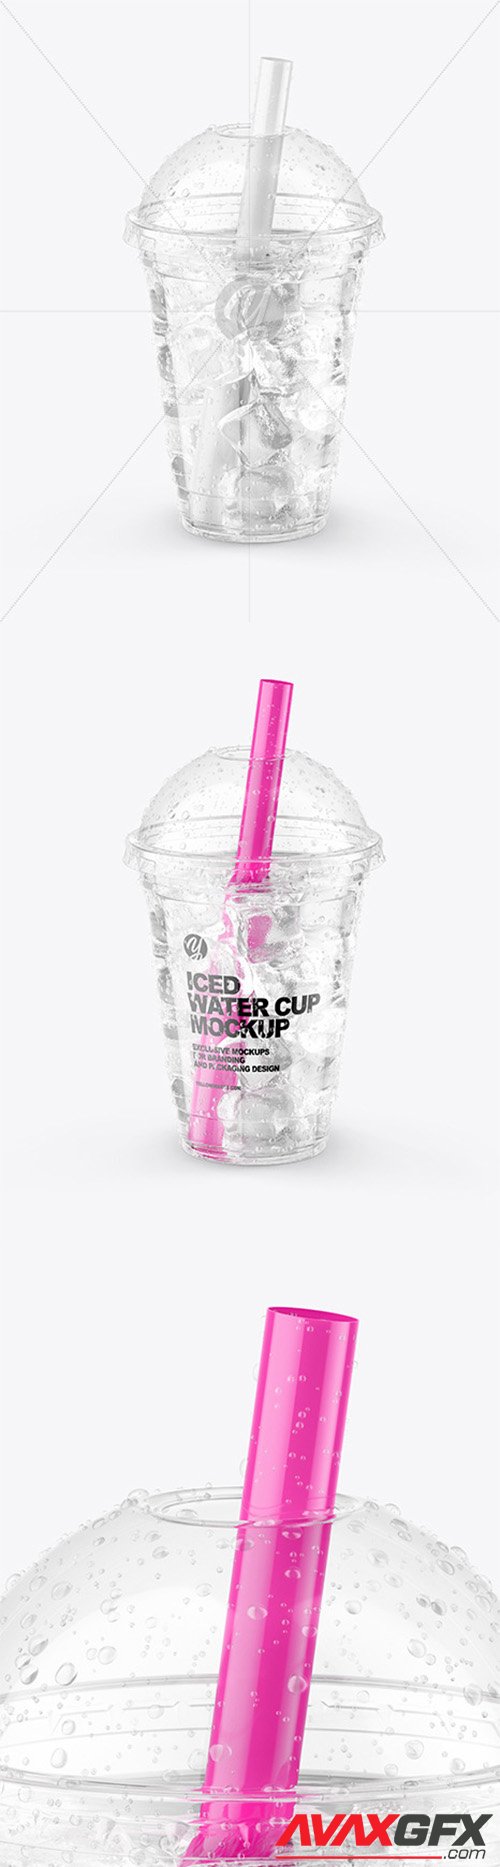 Download Iced Water Cup Mockup 64946 Avaxgfx All Downloads That You Need In One Place Graphic From Nitroflare Rapidgator